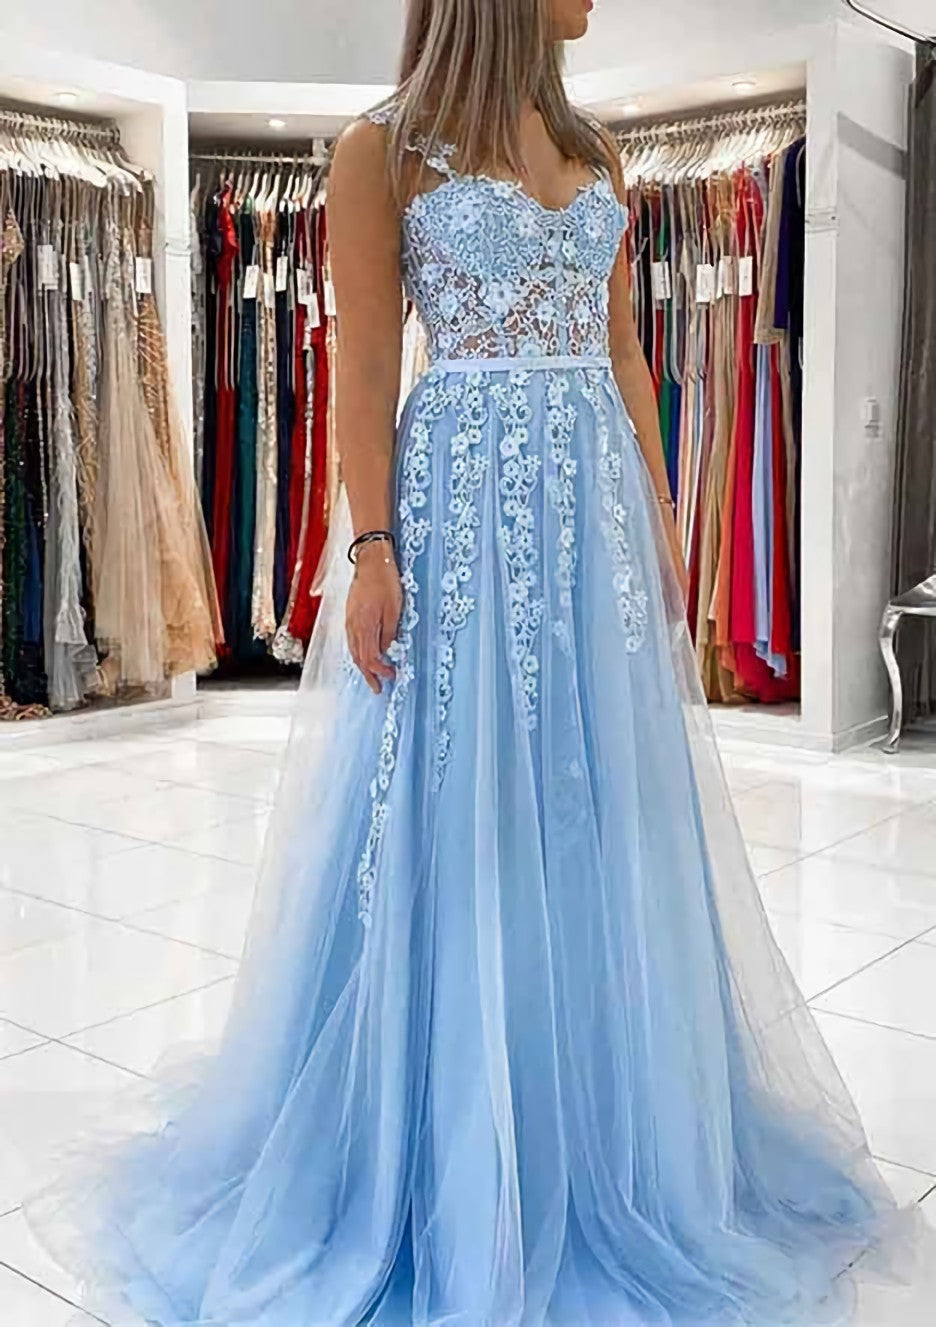 Ball Gown Princess Sweetheart Tulle Sweep Train Corset Prom Dress With Appliqued Lace outfit, Bridesmaid Dress Styles Long